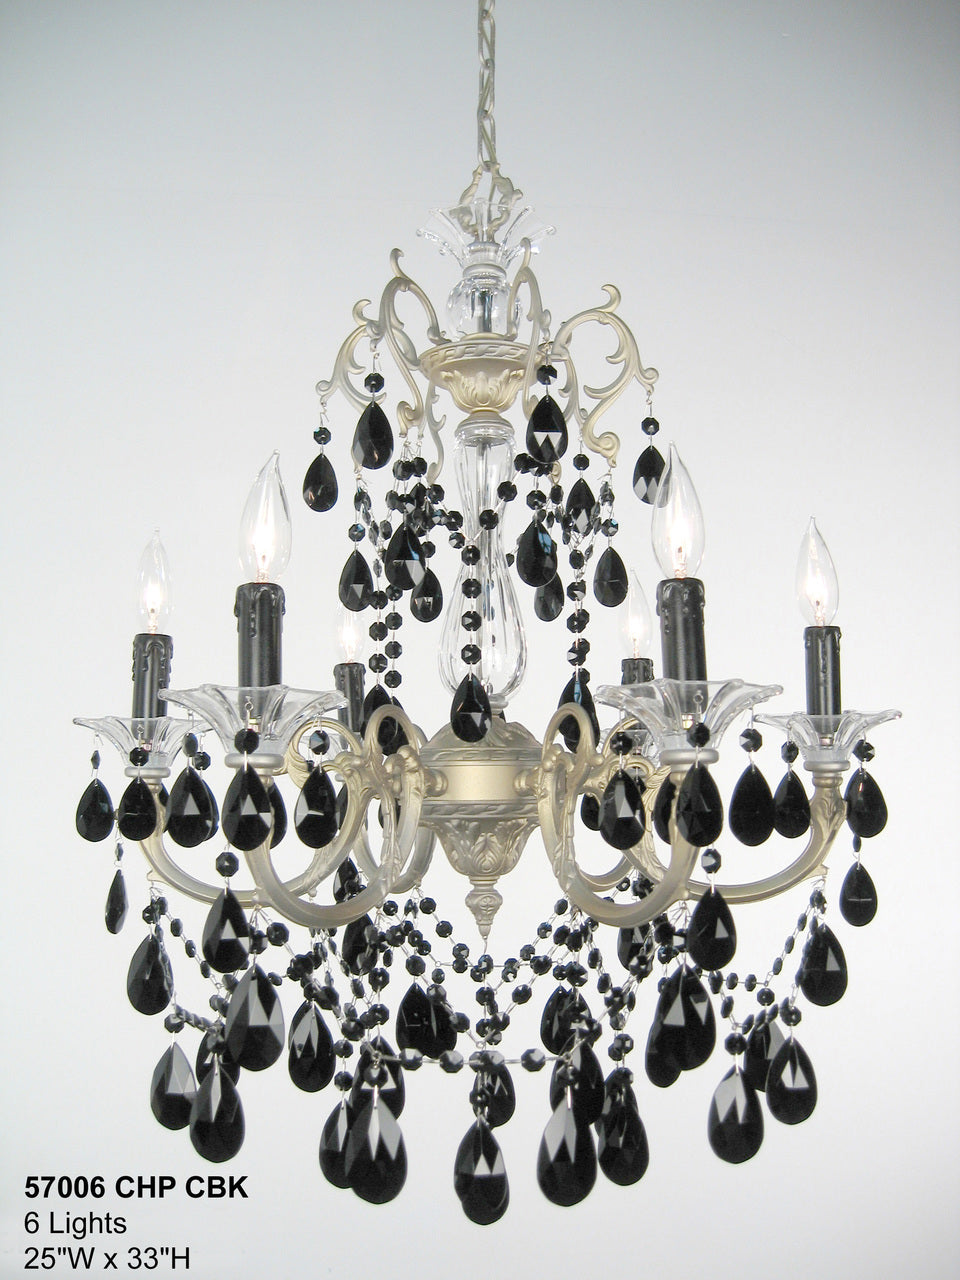 Classic Lighting 57006 CHP SJT Via Venteo Crystal Chandelier in Champagne Pearl (Imported from Spain)